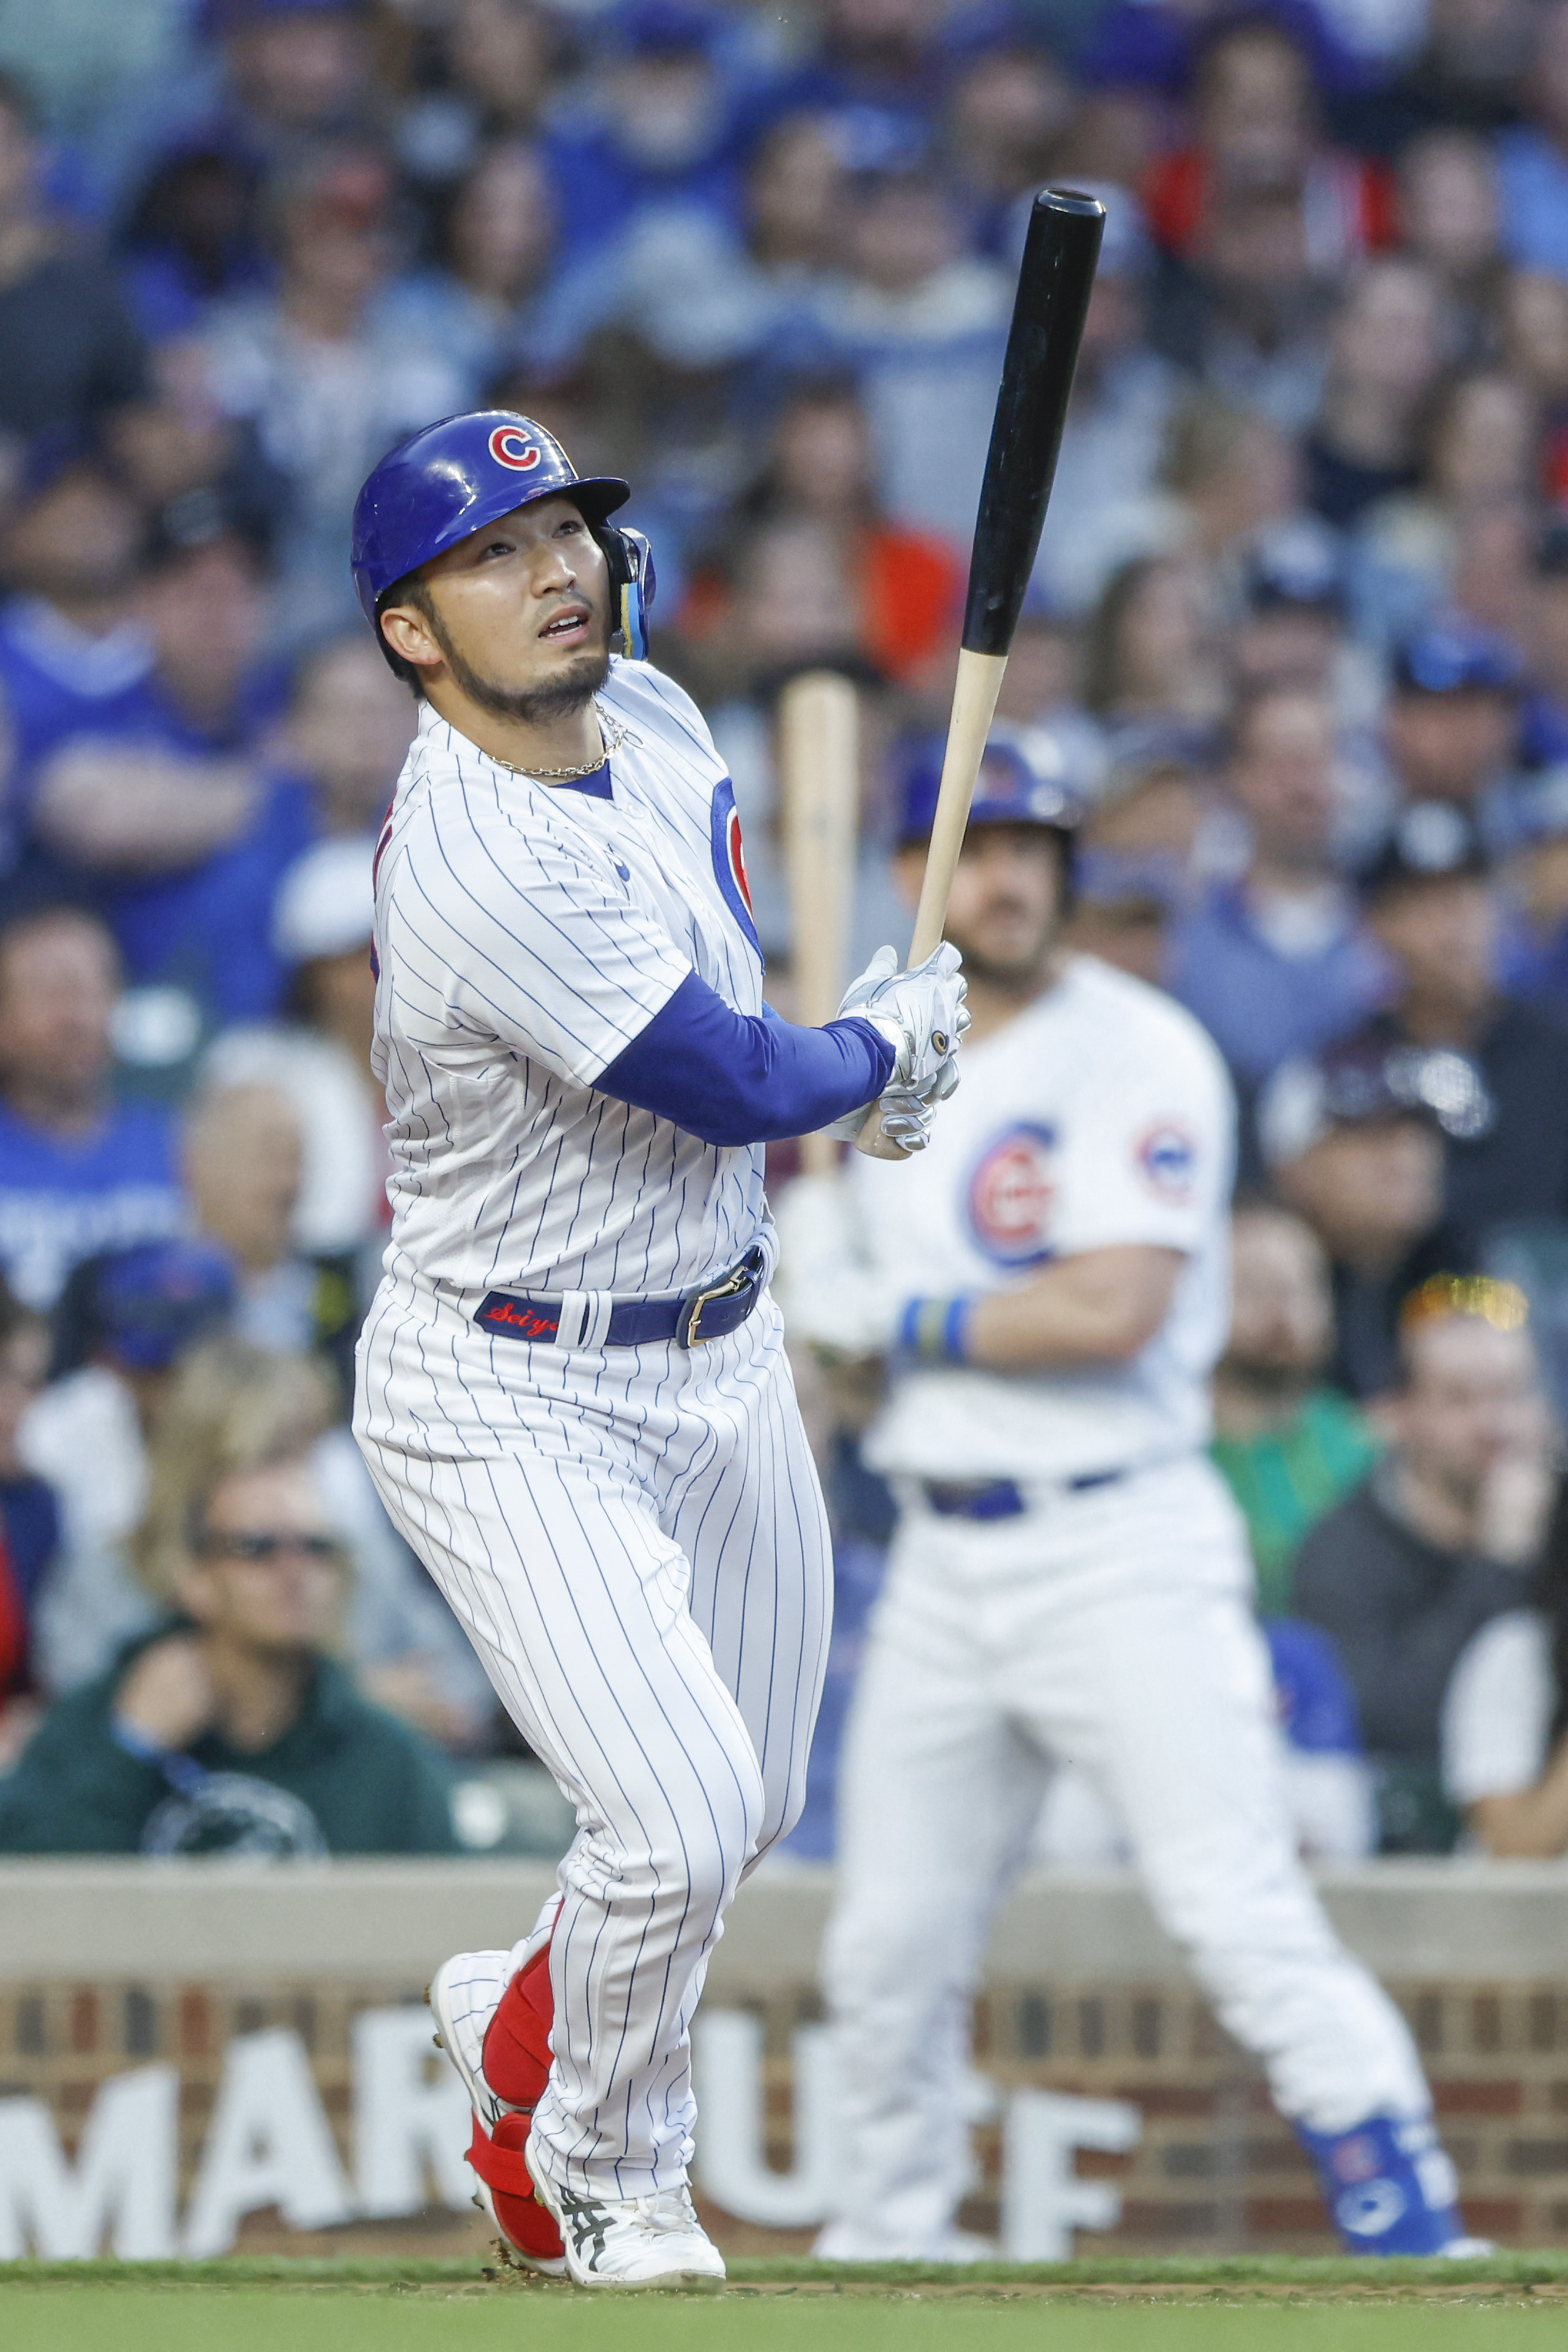 Steele moves to 6-0, Cubs get HRs from Wisdom and Gomes in 10-4